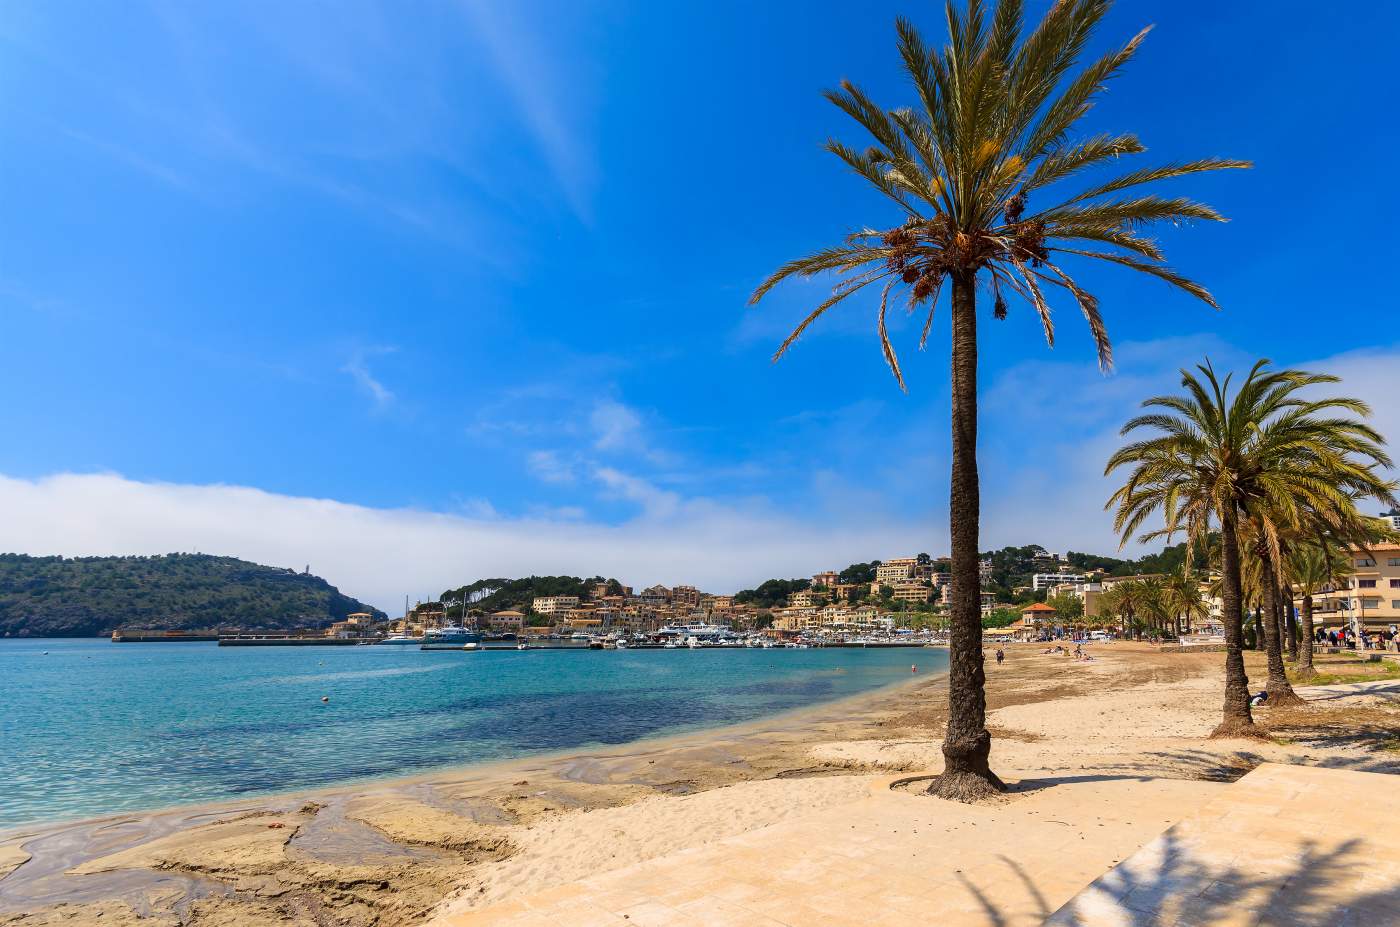 Sandy beach in Port de Sóller, Mallorca, Spain, with mountains in the background.